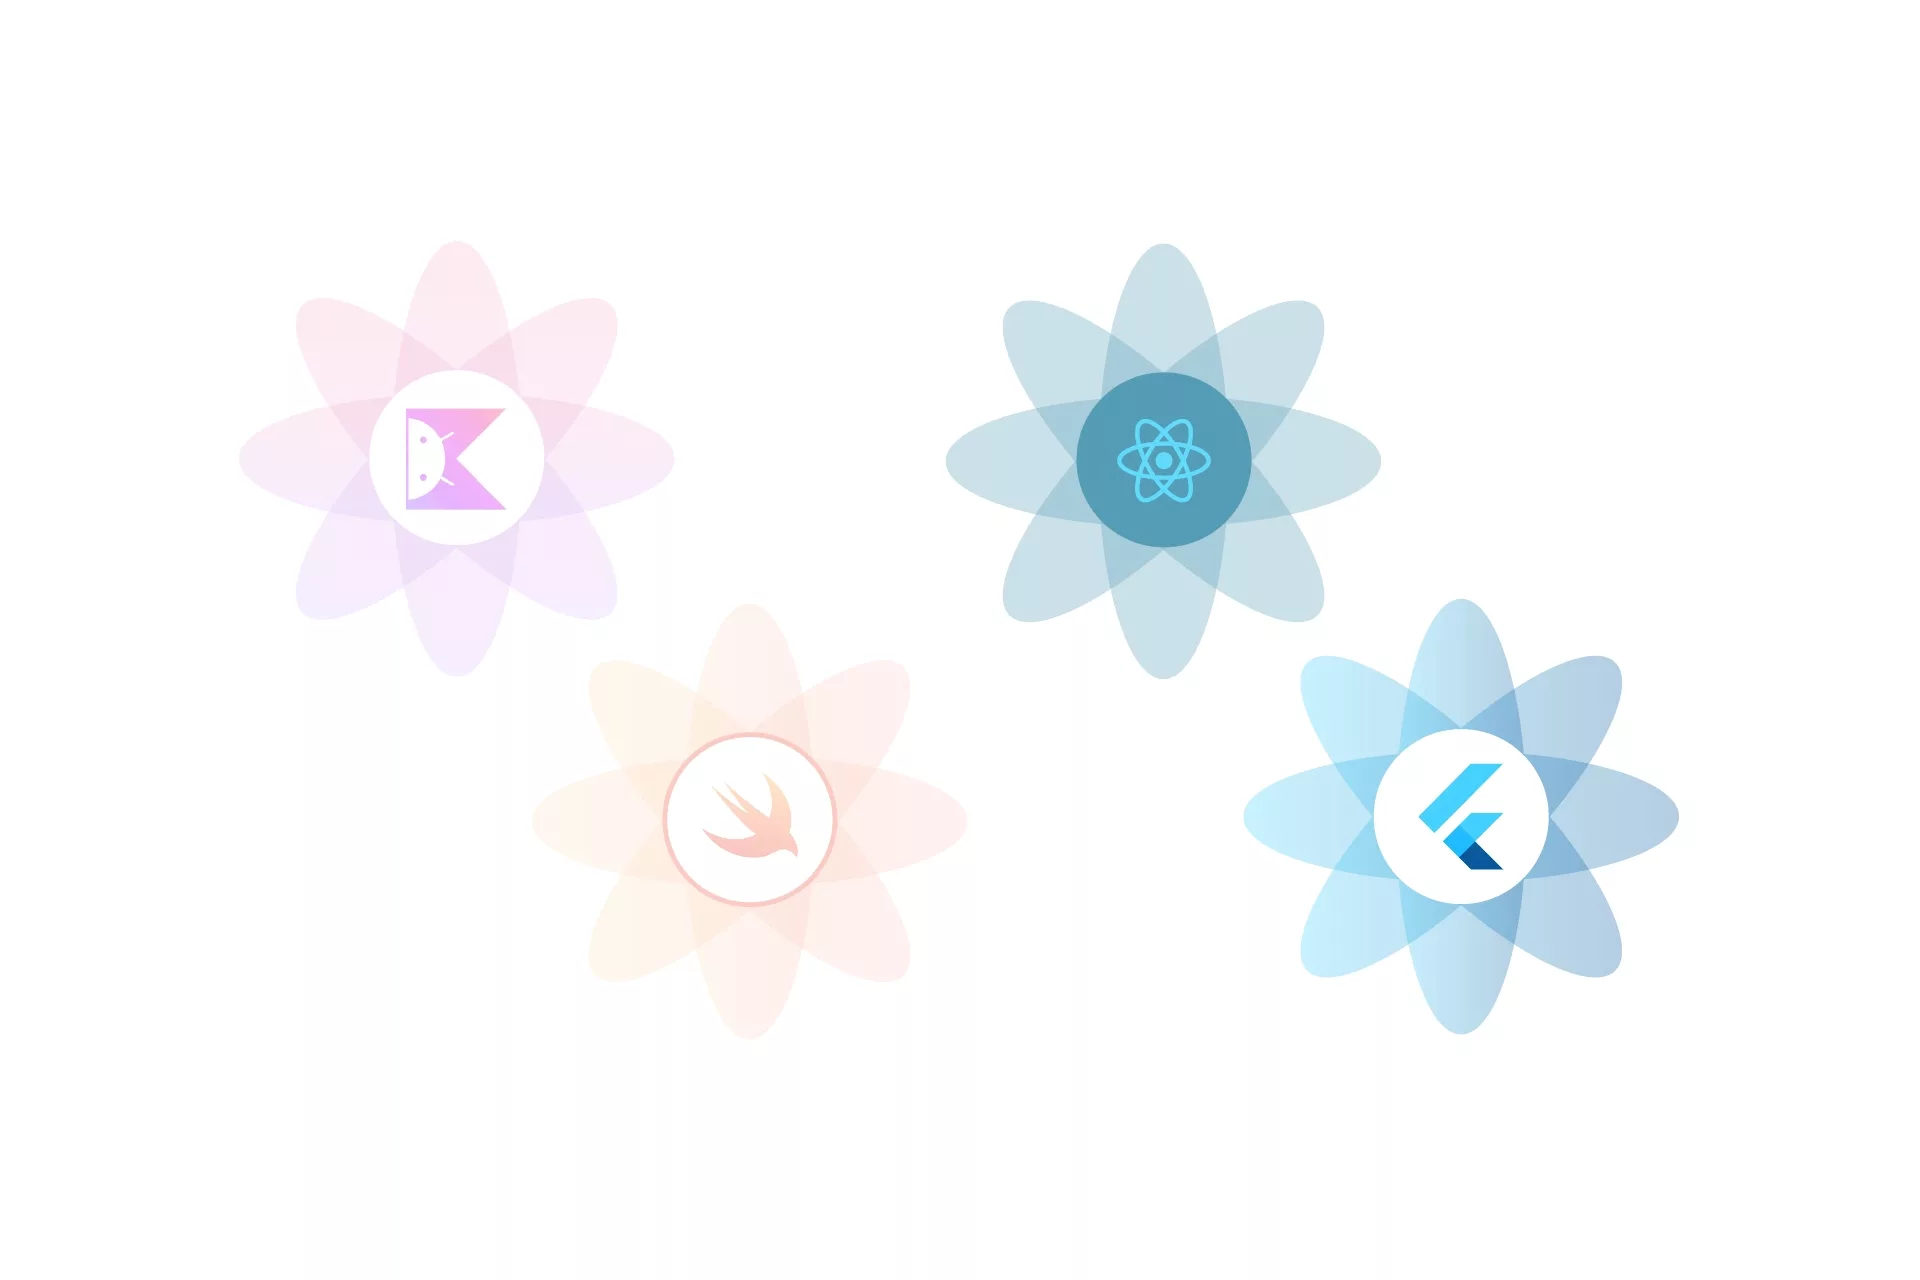 Four flowers that represent Kotlin, Swift, Flutter and React Native side by side. The Kotlin and Swift flowers have a slight transparency whilst the Flutter and React Native flowers can be seen clearly.